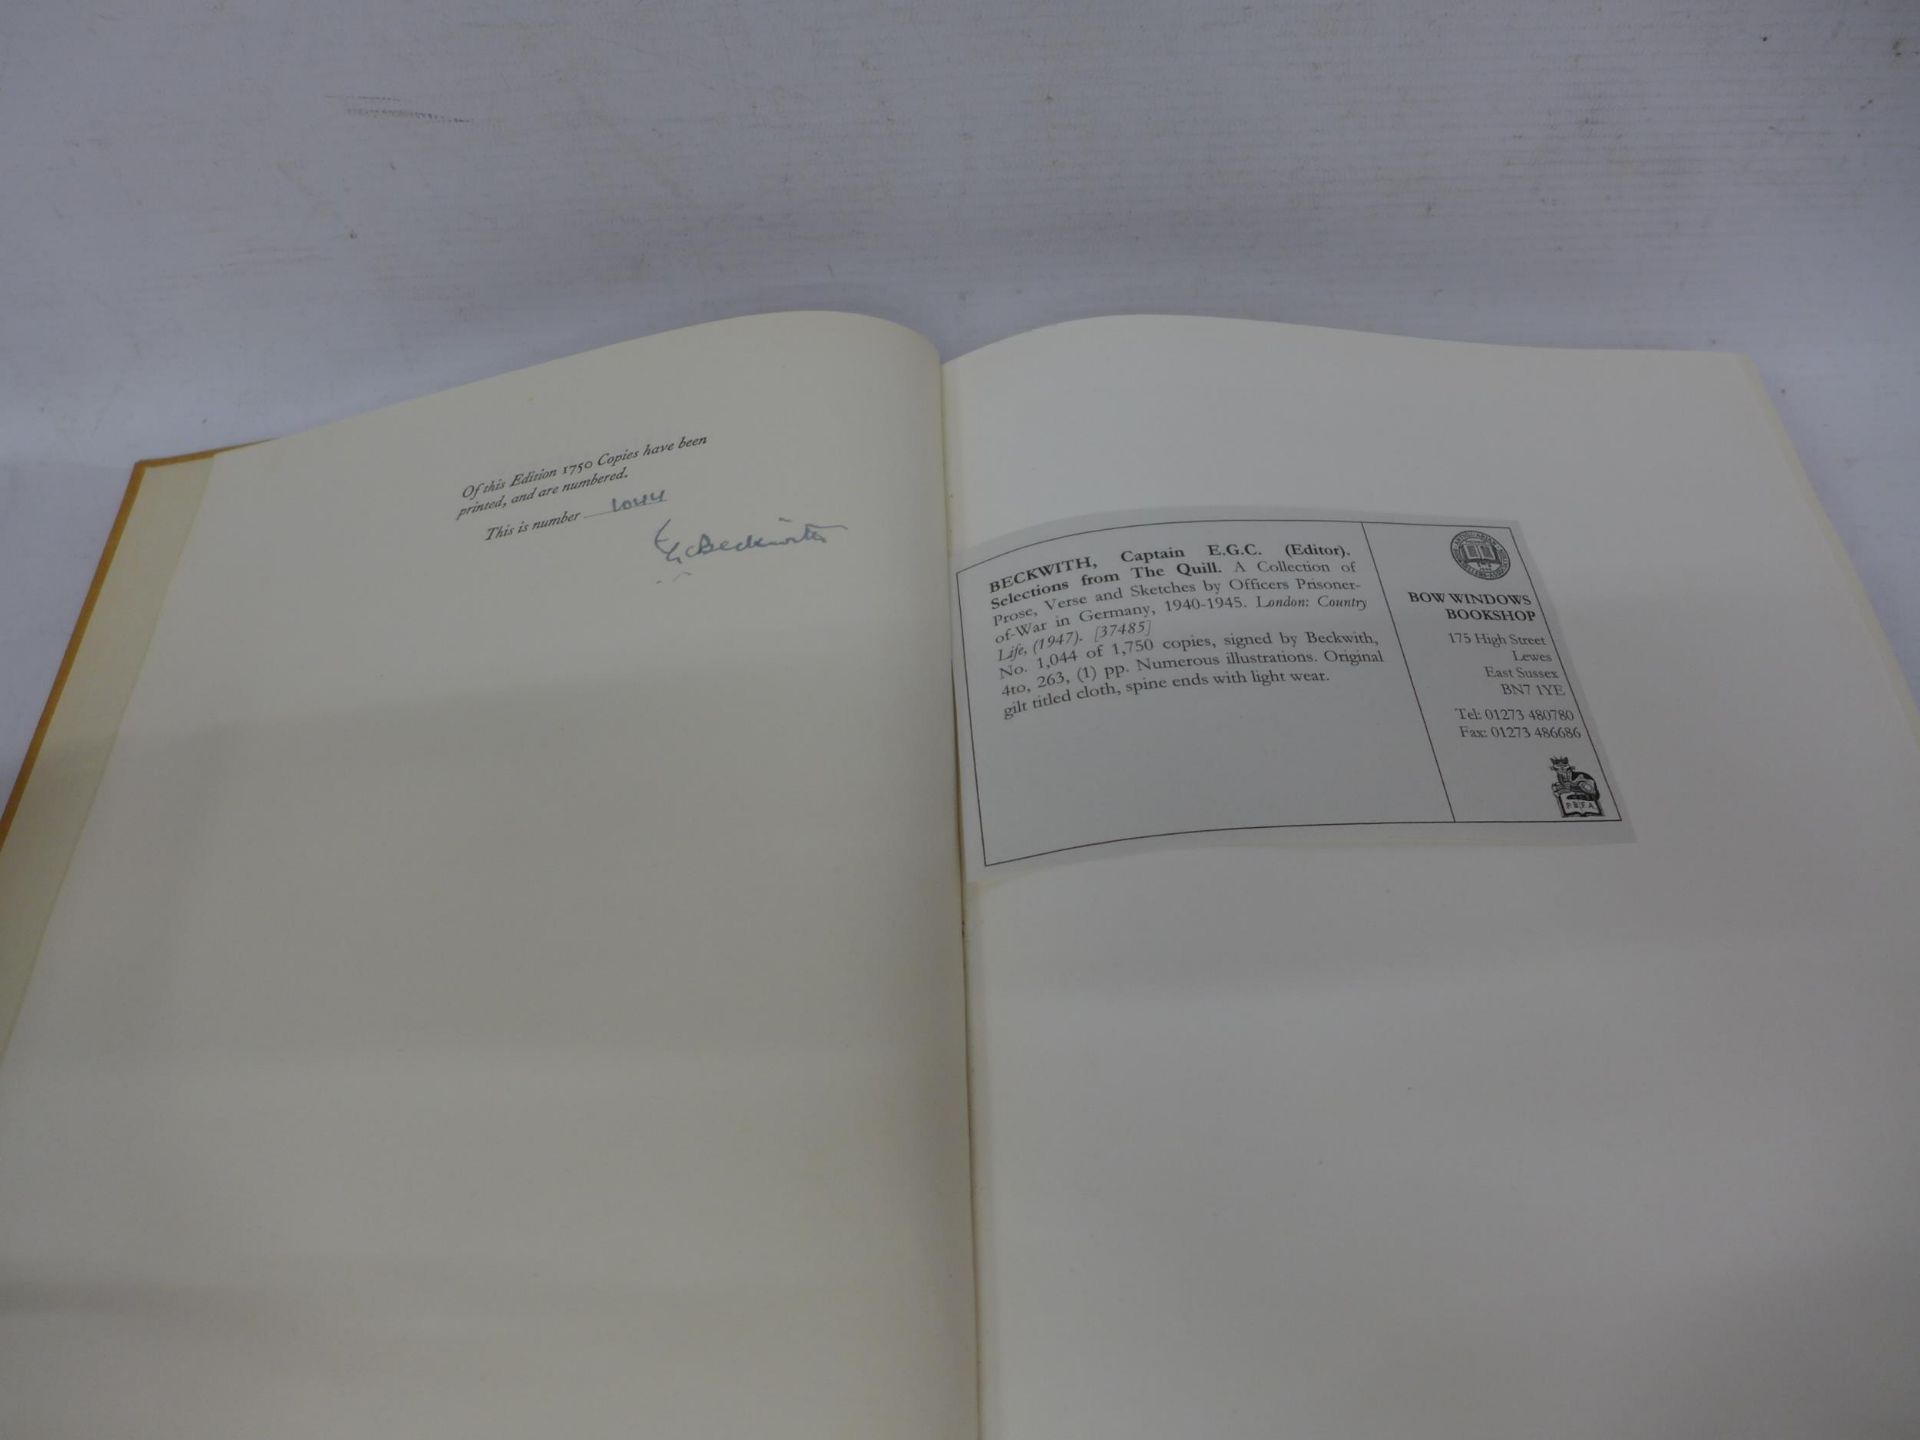 A SIGNED LIMITED EDITION 1044 OF 1750 COPIES 'THE QUILL' BY CAPTAIN E.G.C. BECKWITH, 1947 - Image 2 of 3